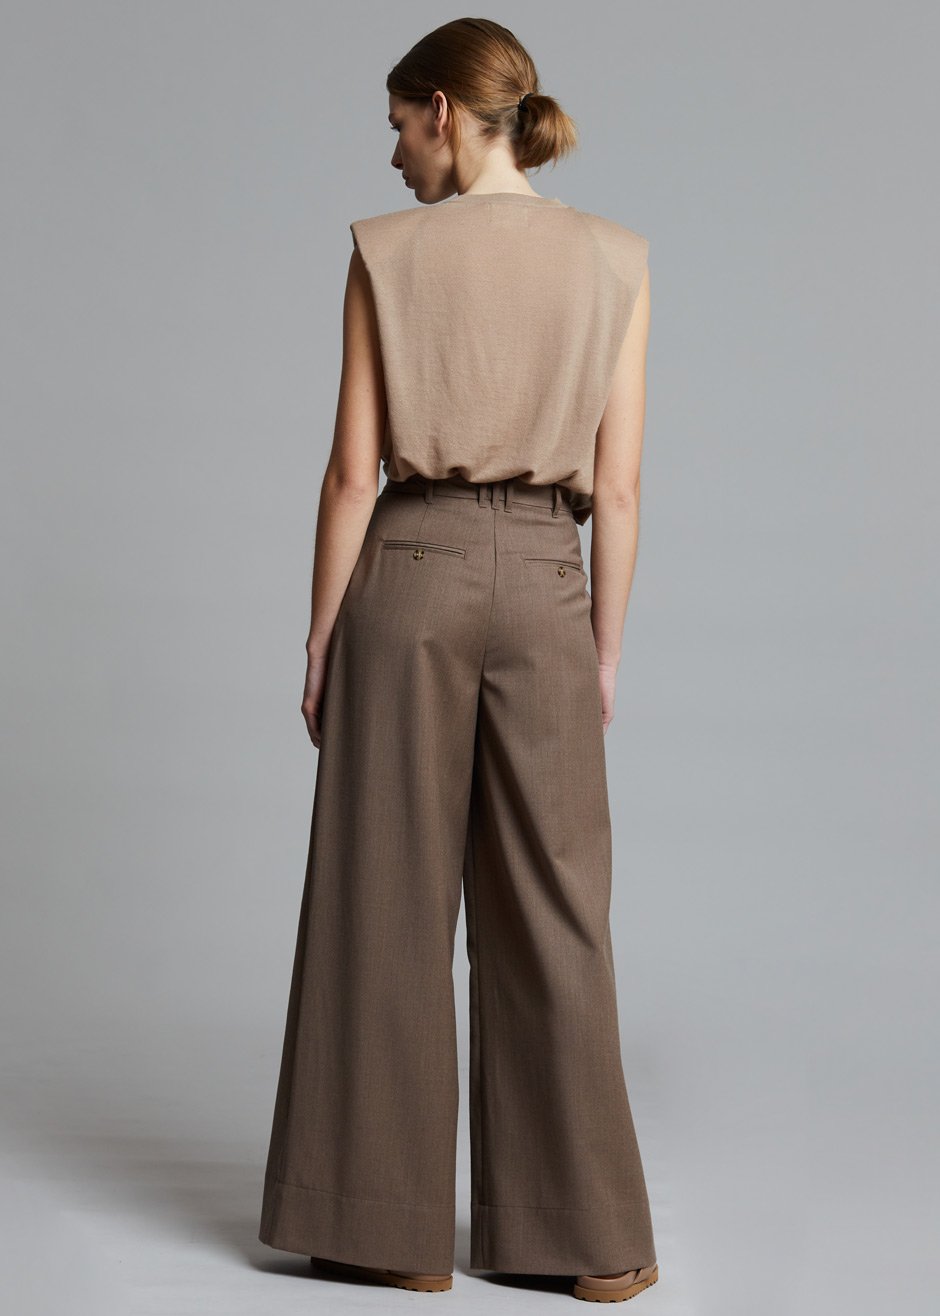 Equus Pants by The Garment in Taupe - 7